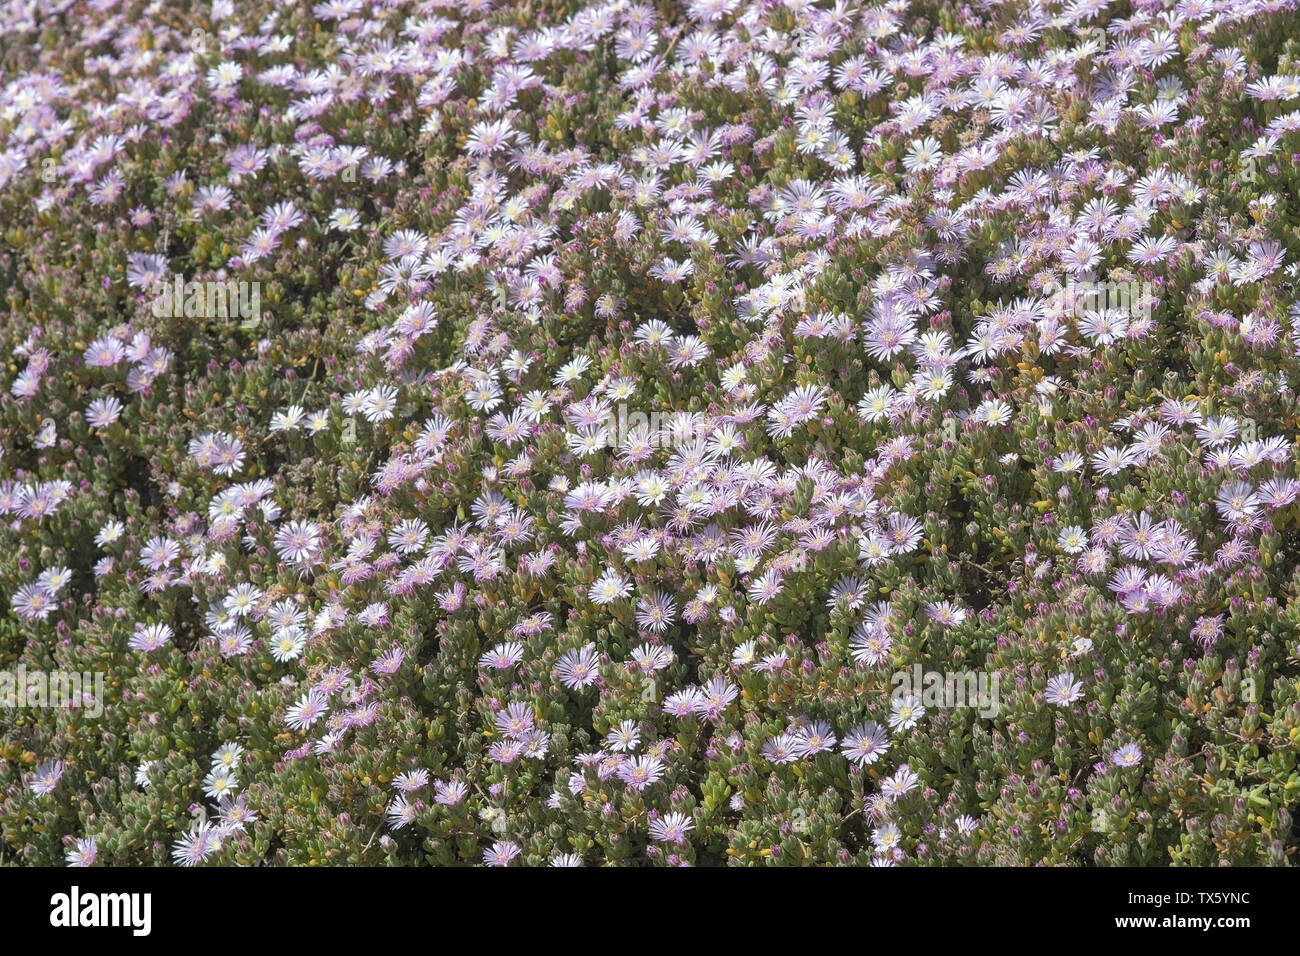 Abundance of pink flowers on succulent plant in spring sunshine. Stock Photo